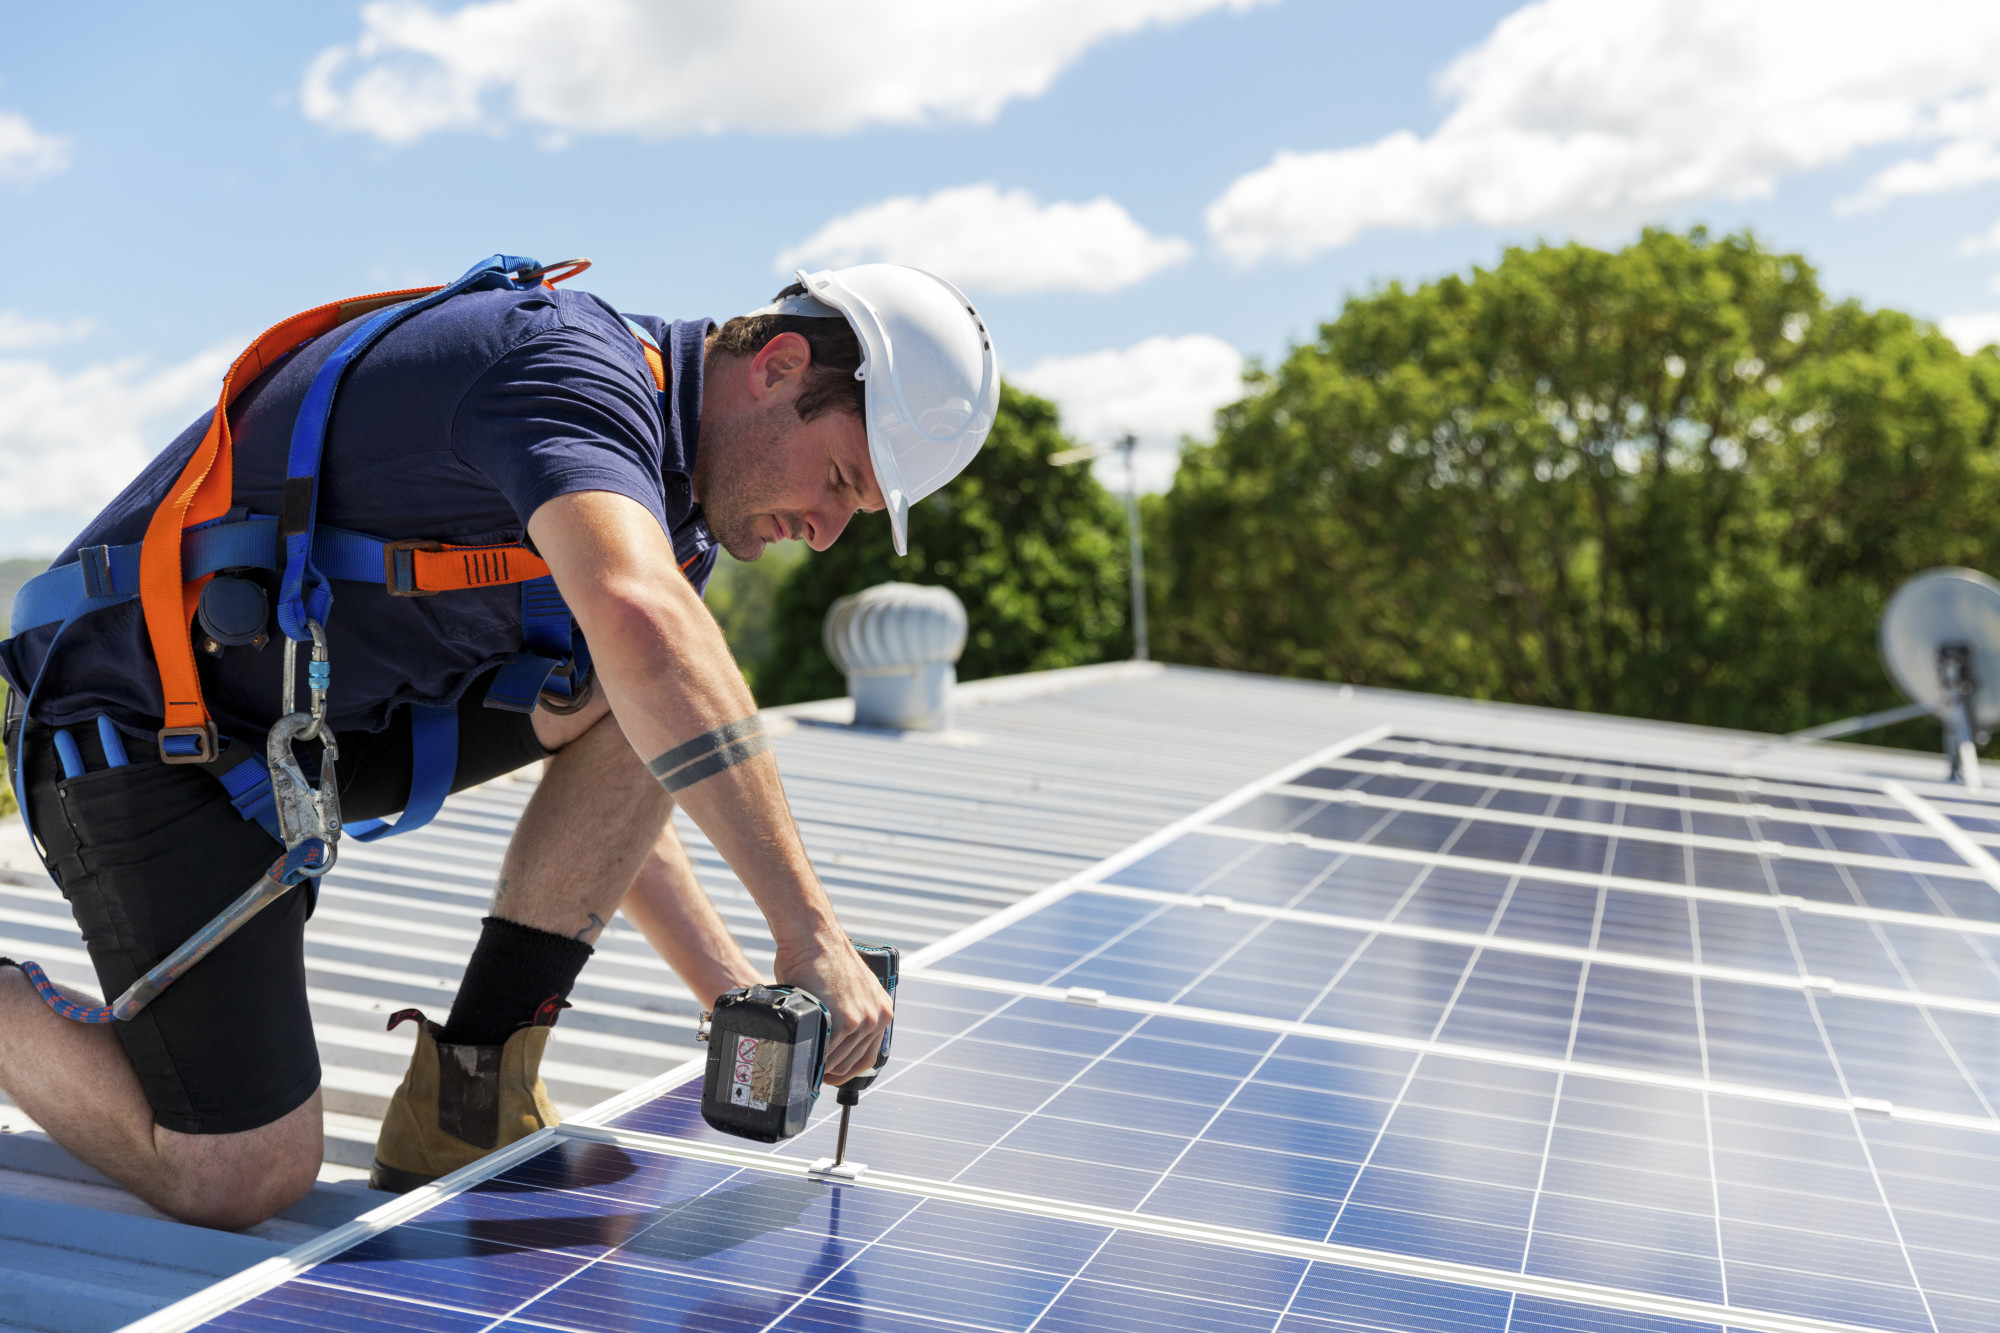 5 Things to Consider When Hiring Solar Panel Installers